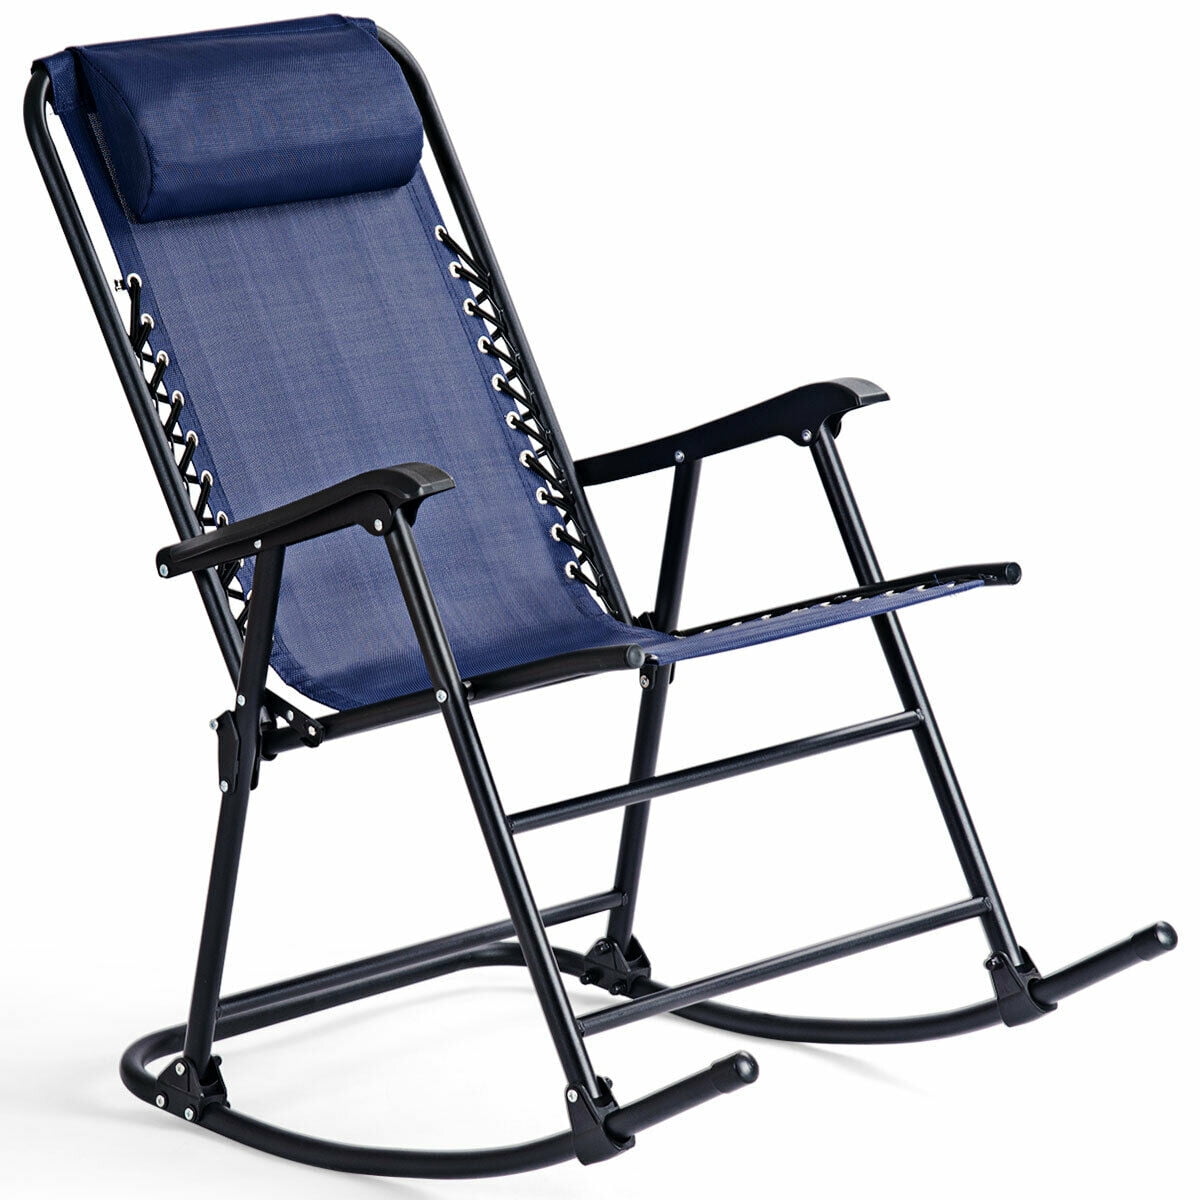 Portable Rocking Chair Recliner Headrest Patio Pool Yard Outdoor Furniture Seat 